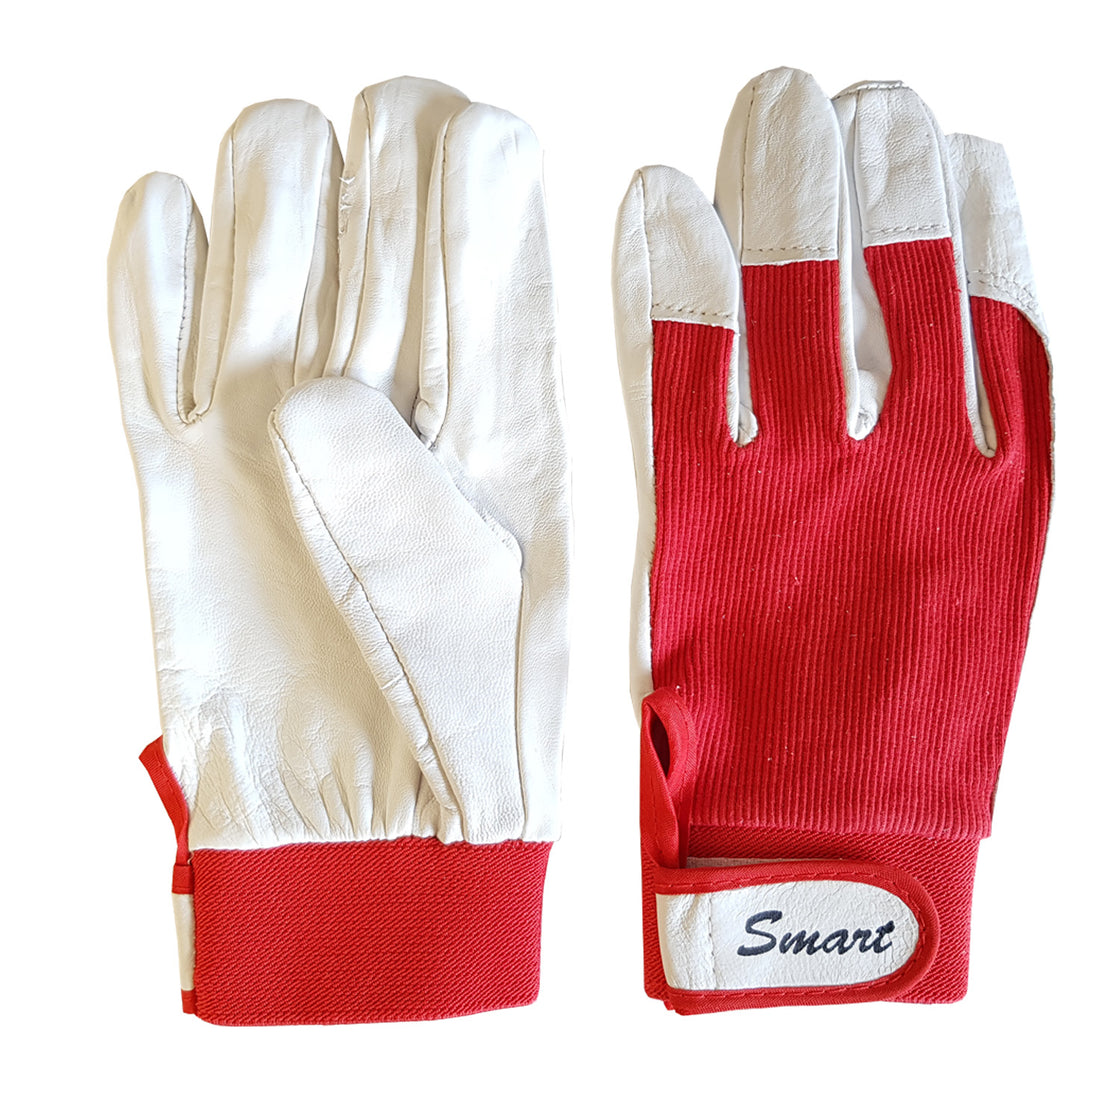 RED & WHITE LEATHER WORKER GLOVES - PGS Supplies 21 Ltd